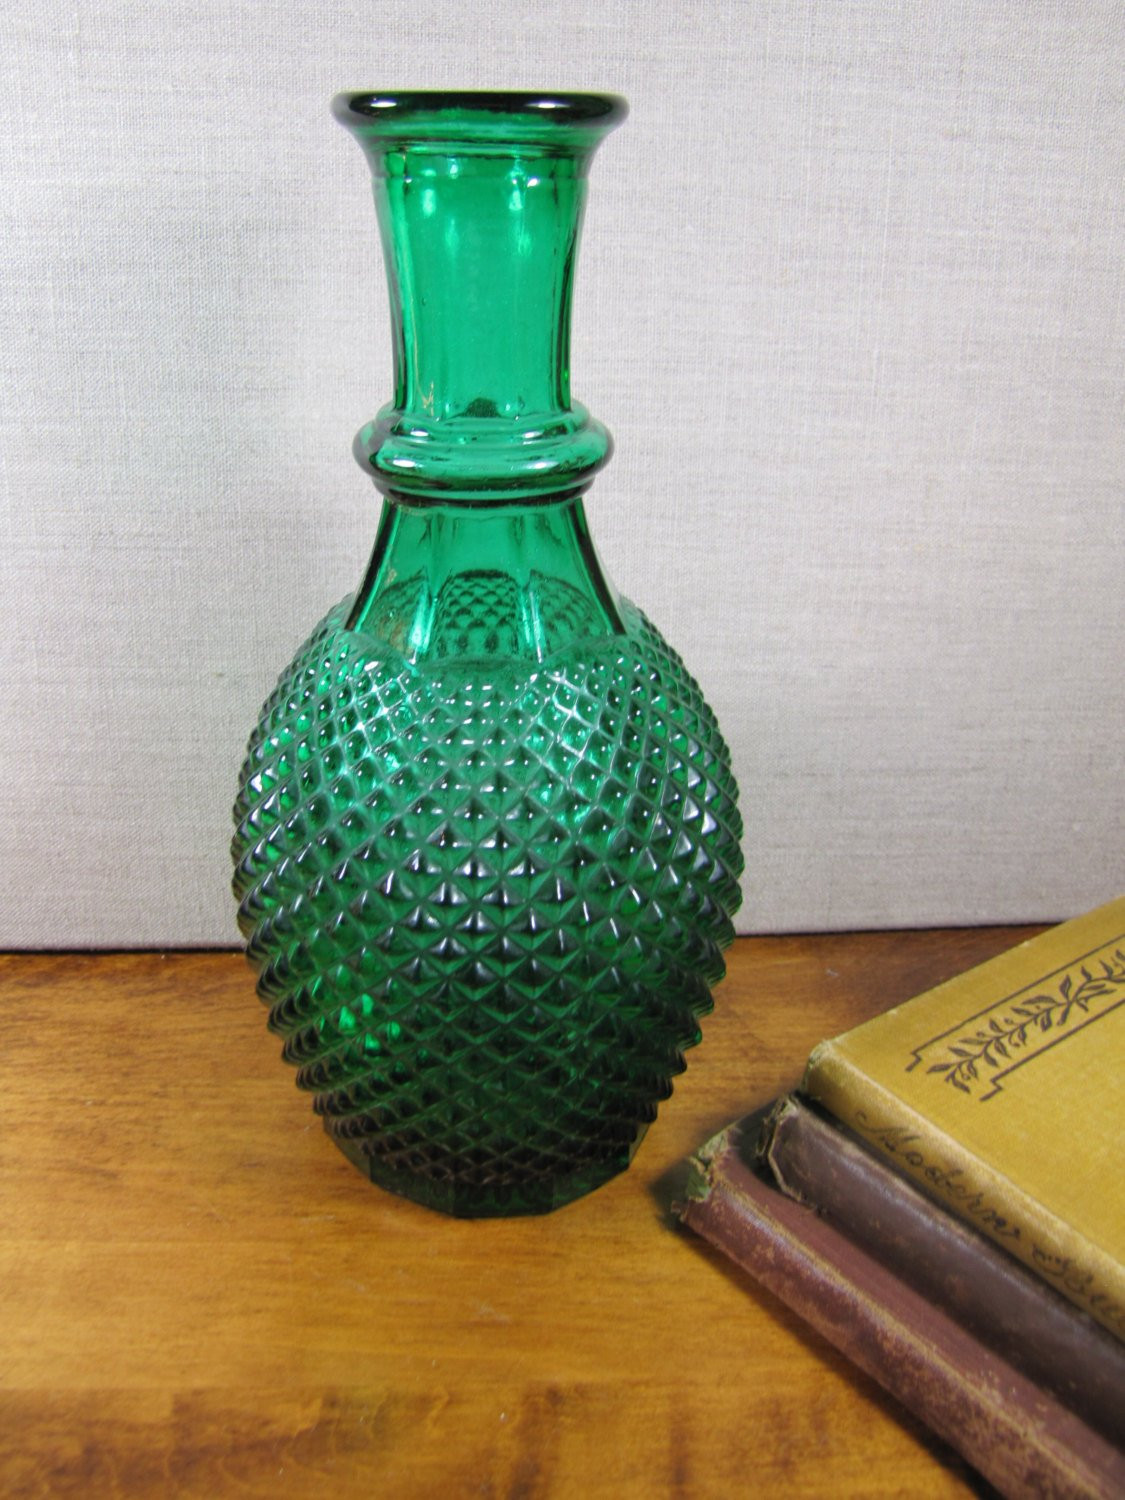 16 Ideal Vintage Small Green Glass Vase 2024 free download vintage small green glass vase of emerald green glass vase diamond shaped paneled in dc29fc294c28ezoom